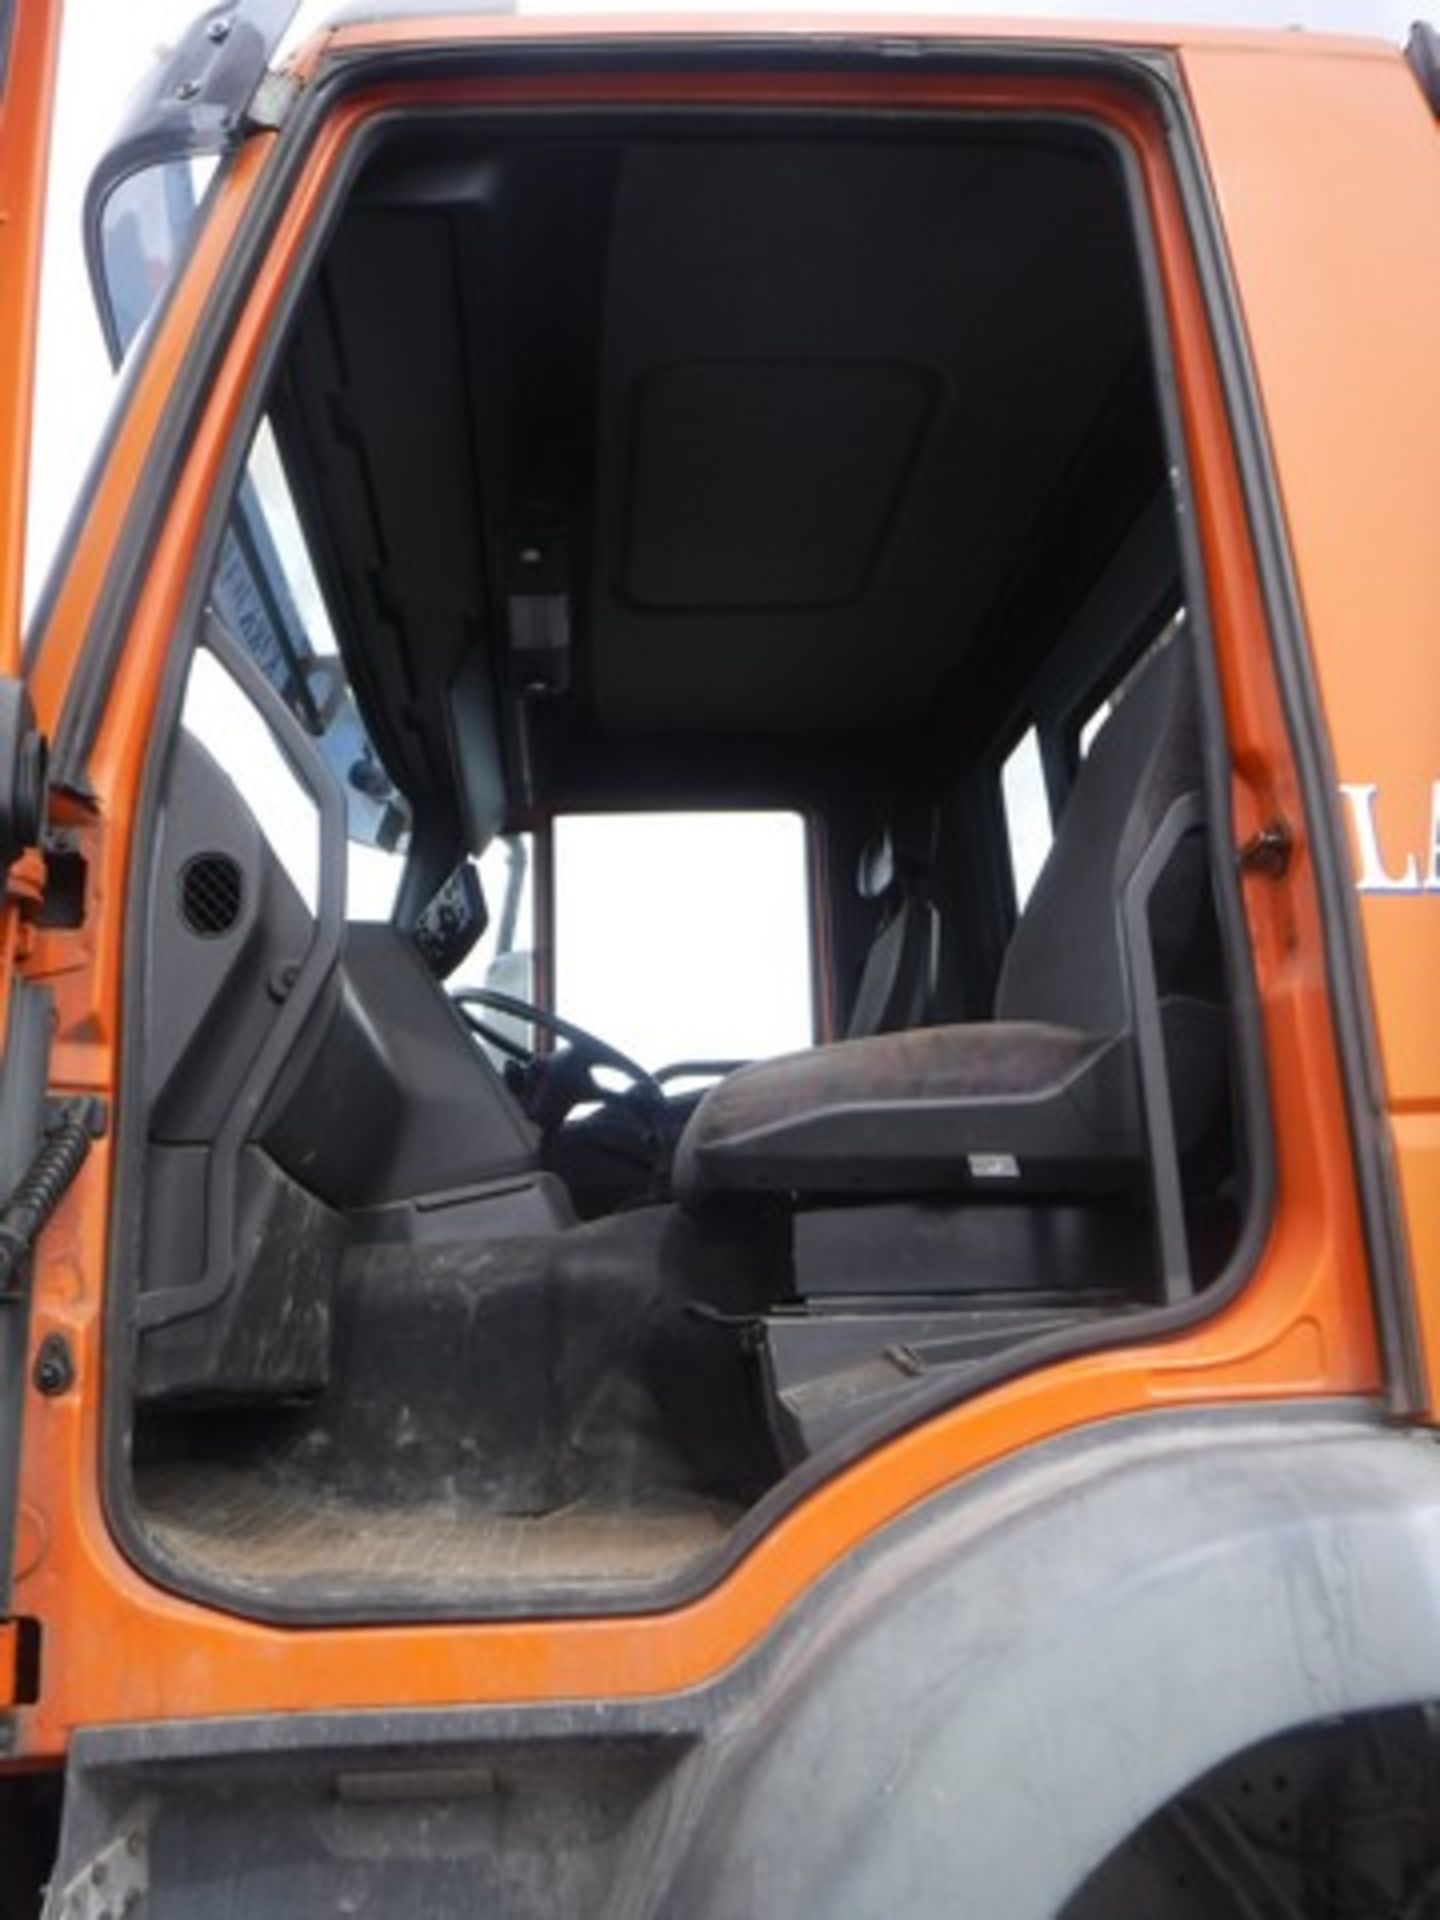 IVECO DAILY 50C15 3.5WB - 7790cc - Image 4 of 41